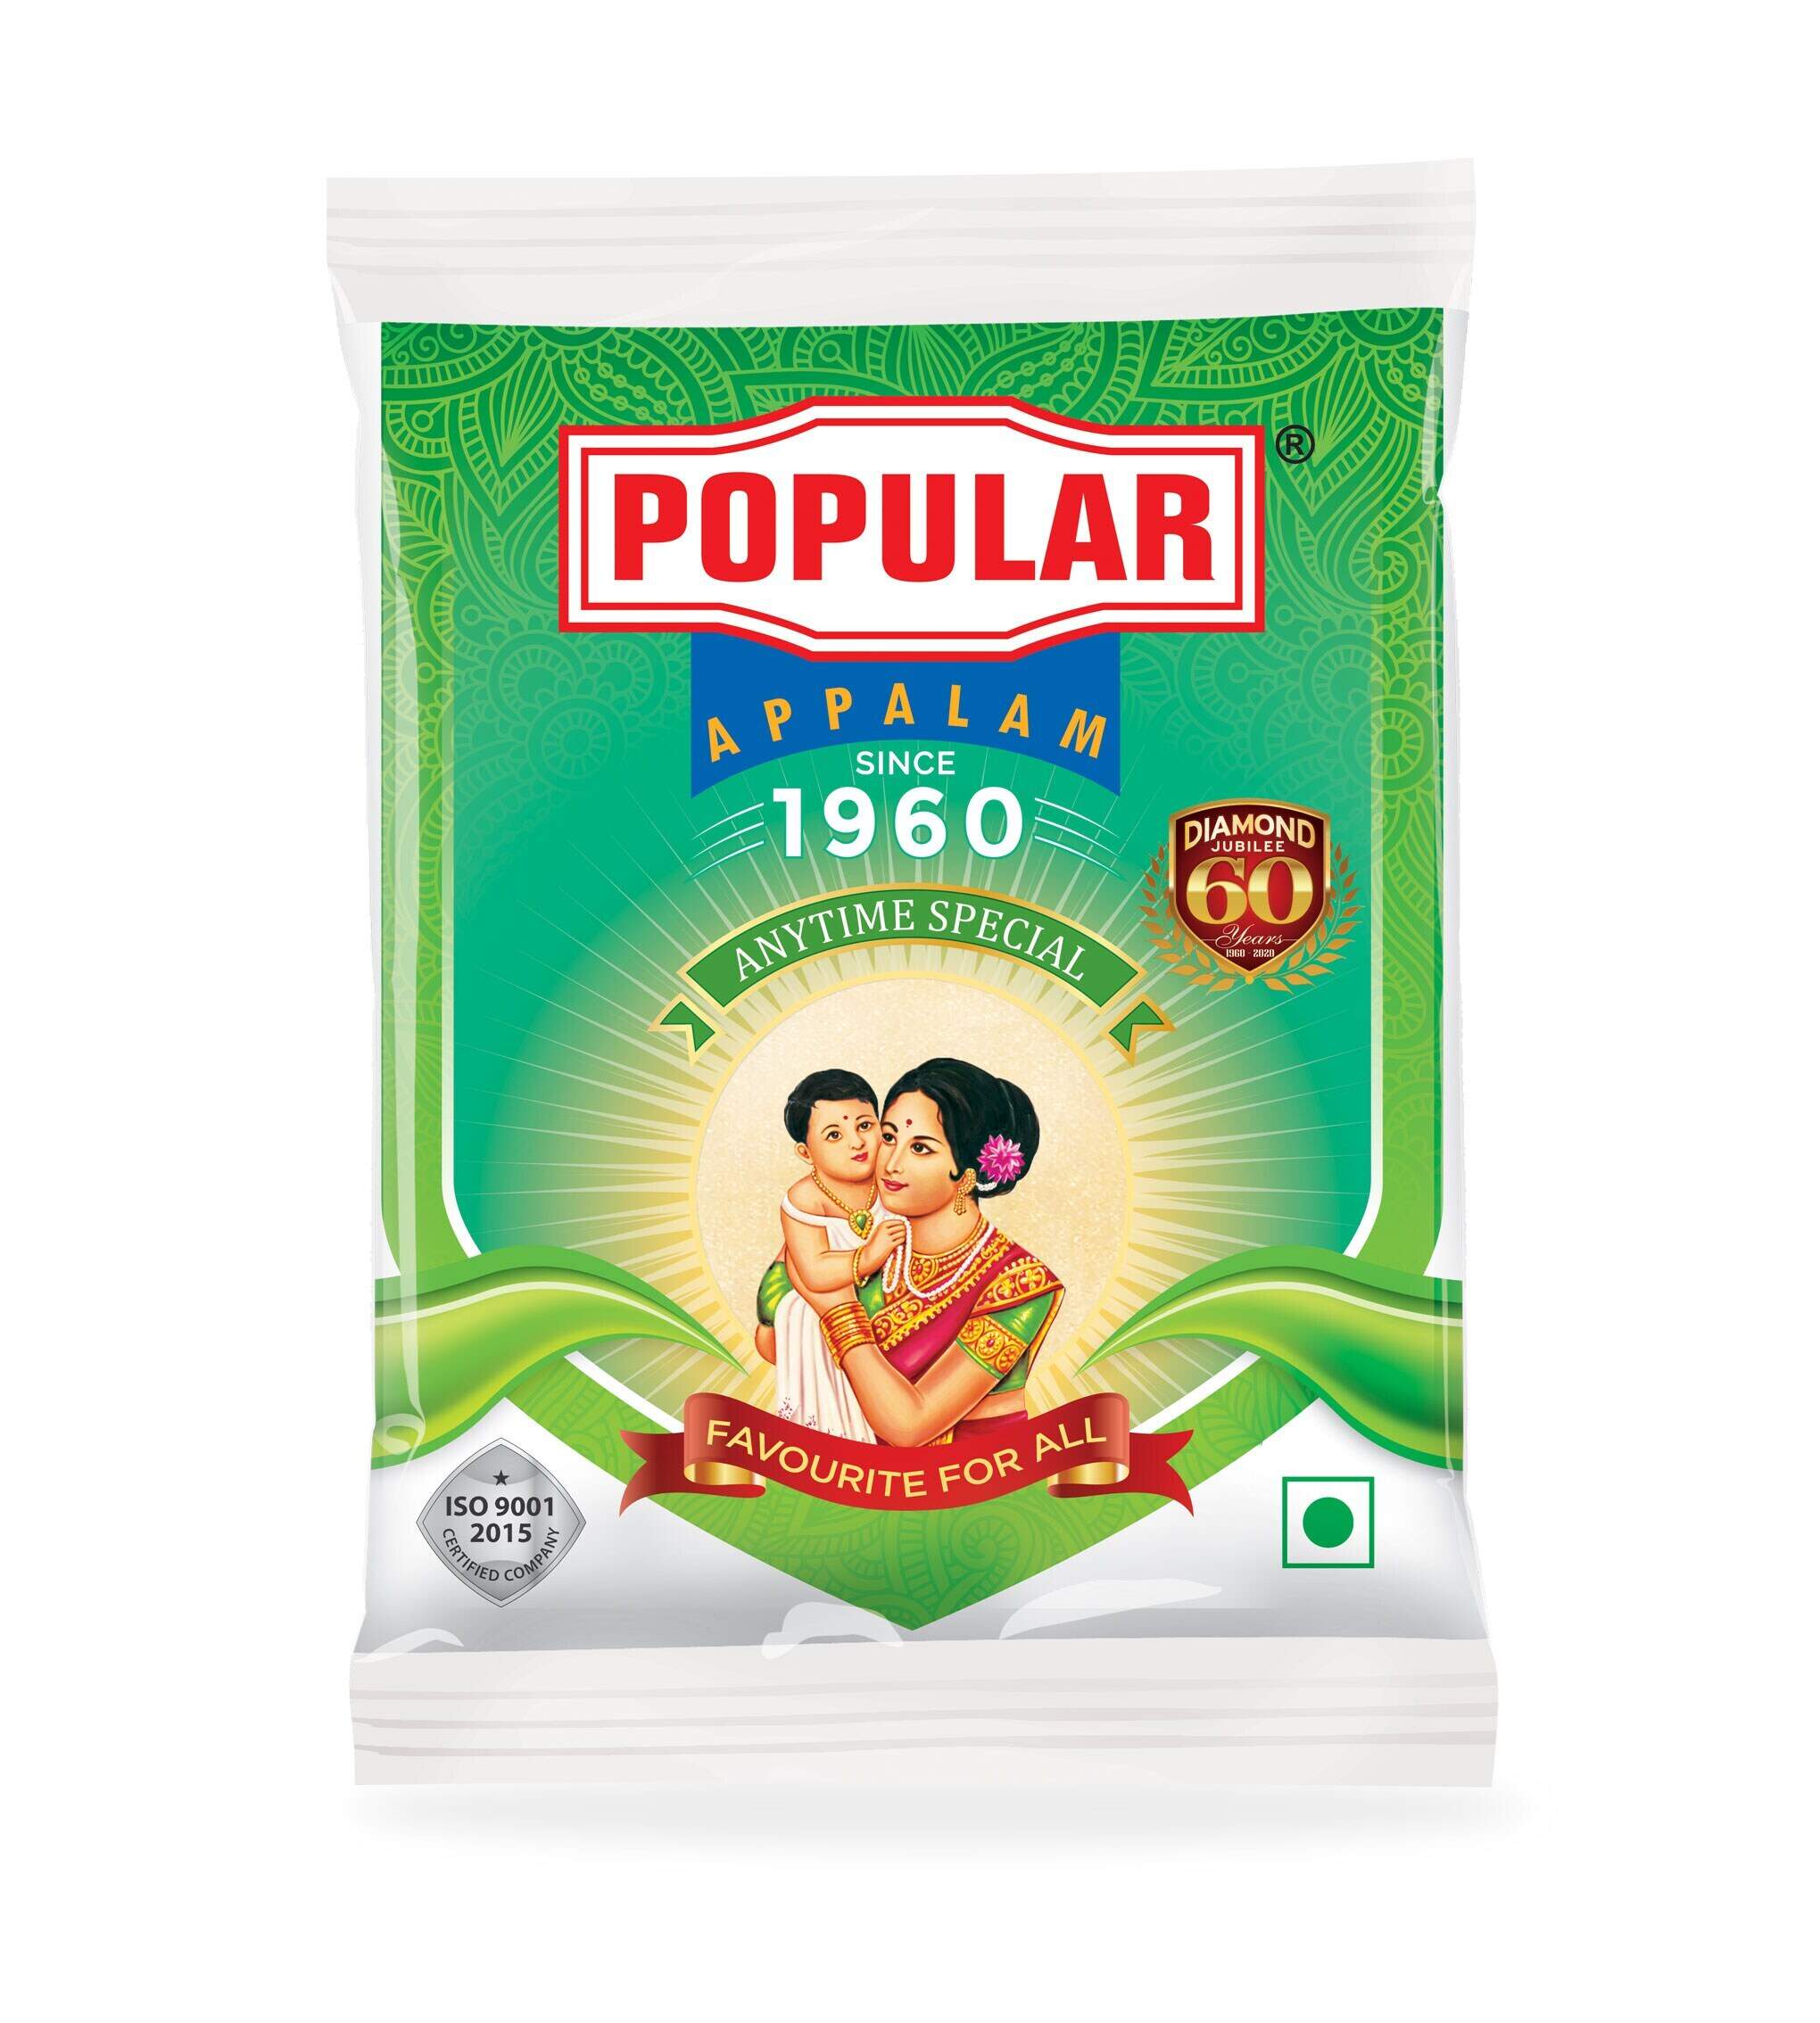 POPULAR APPALAM ANYTIME SPECIAL 